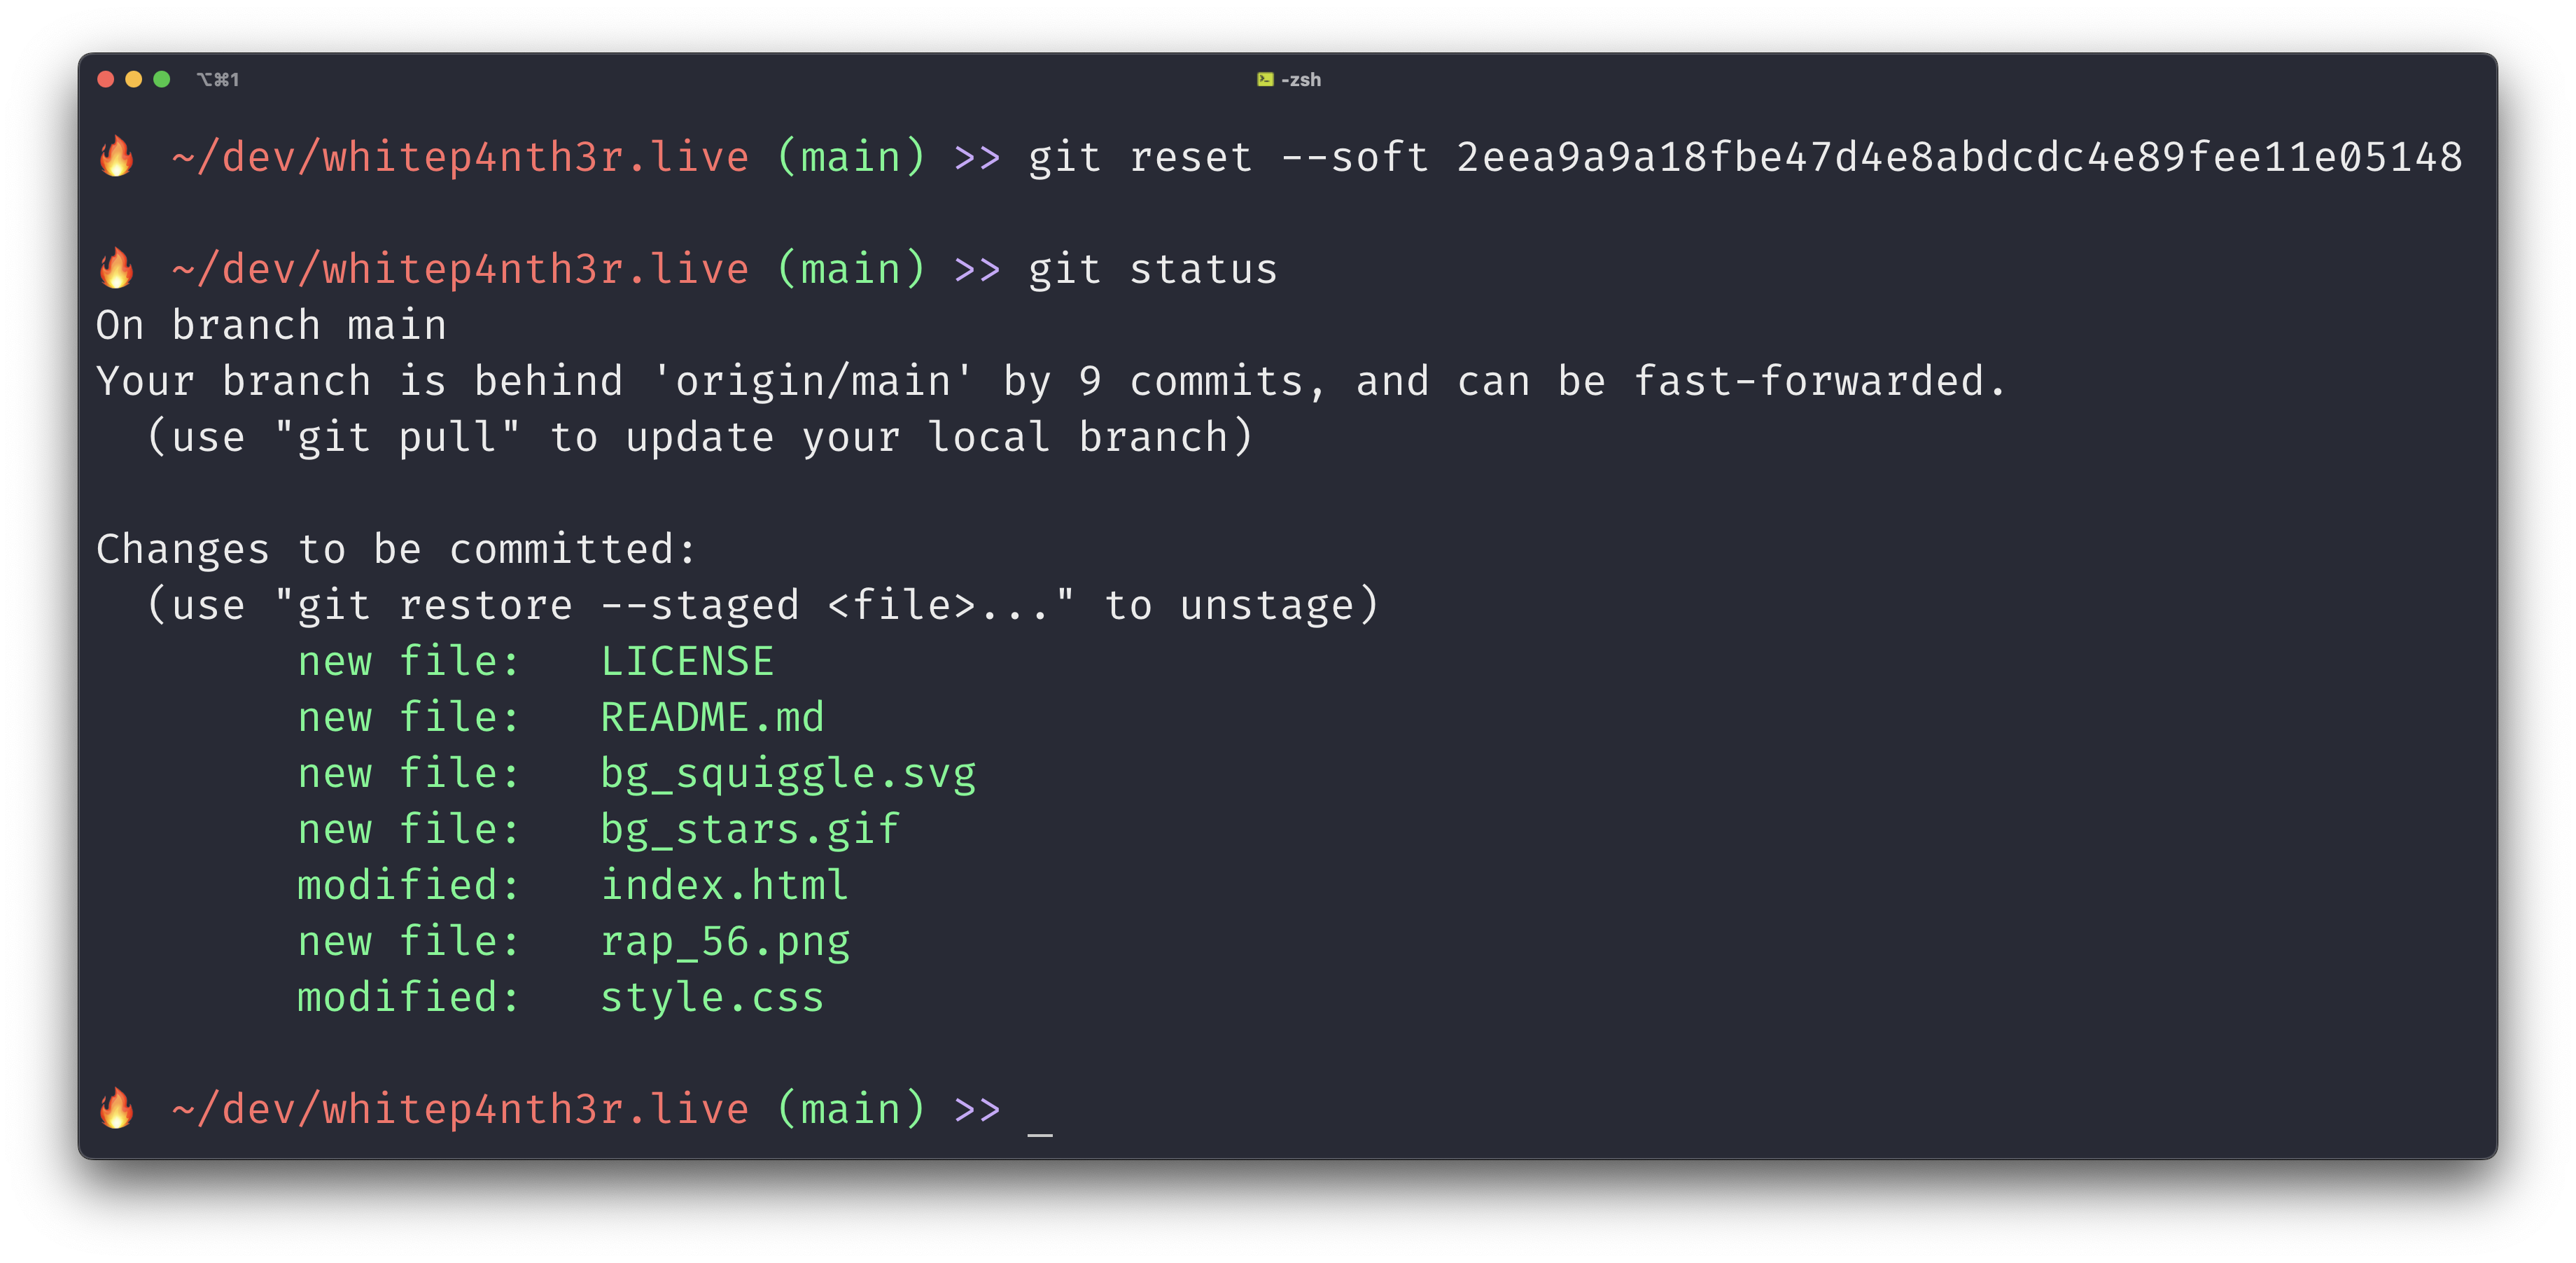 Terminal output showing a git reset --soft with a hash, then git status which shows the branch is behind origin main by 9 commits, and there are 7 file changes.